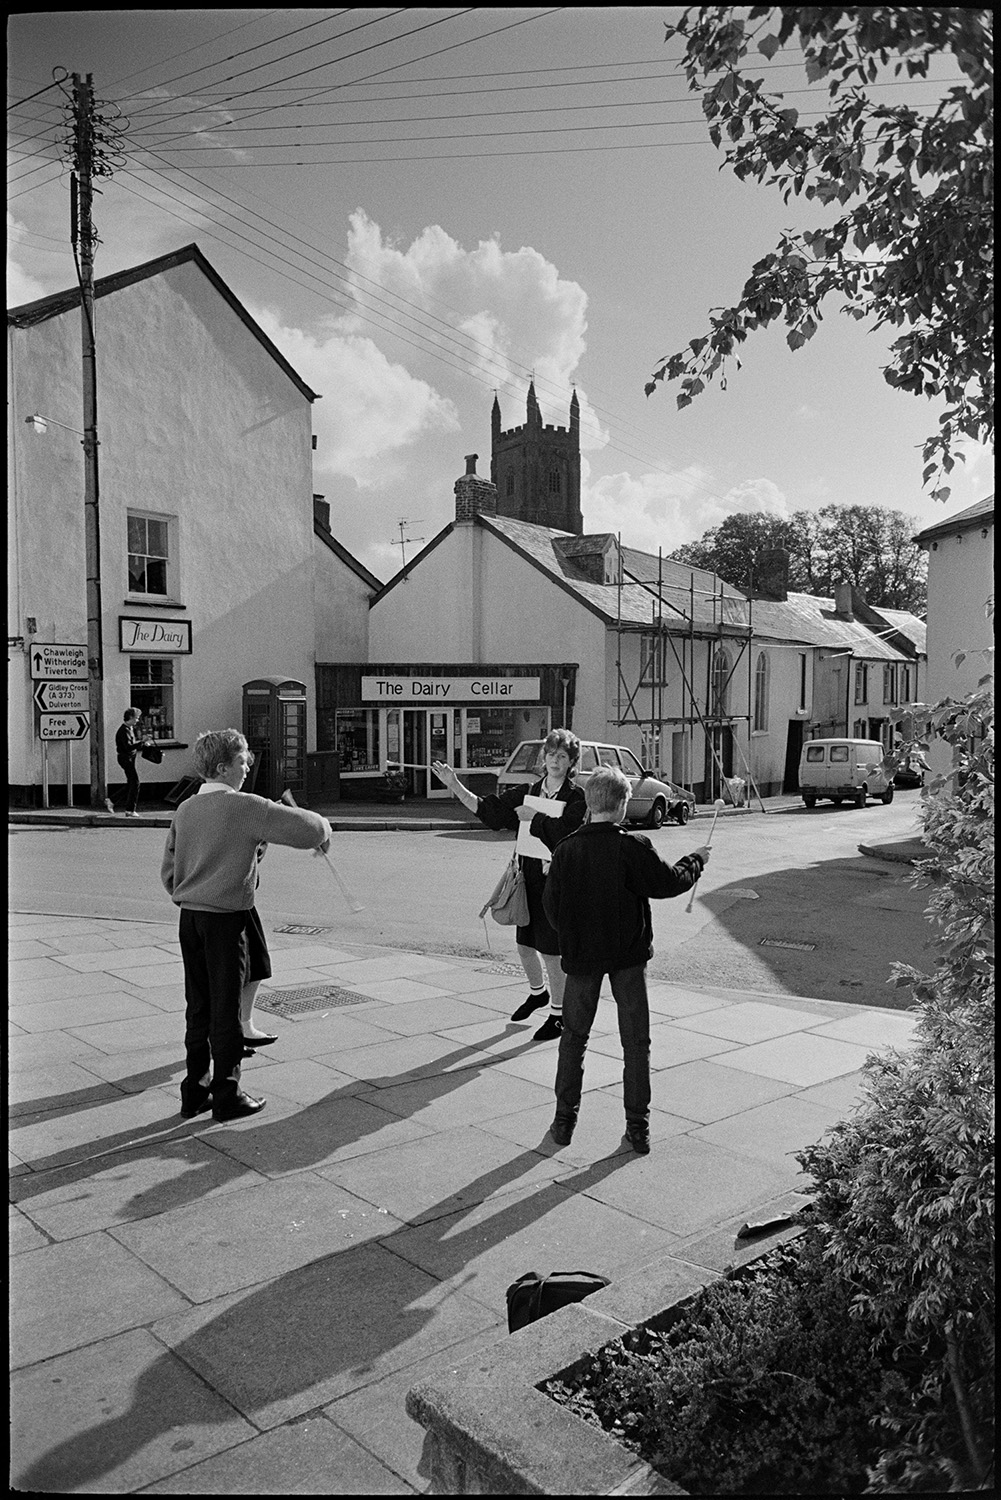 Street scenes with children practising throwing a baton.
[Children practising throwing a baton on a street corner in Chulmleigh. Chulmleigh church tower is in the background with town houses, a telephone kiosk, and the shop front of The Dairy Cellar.]